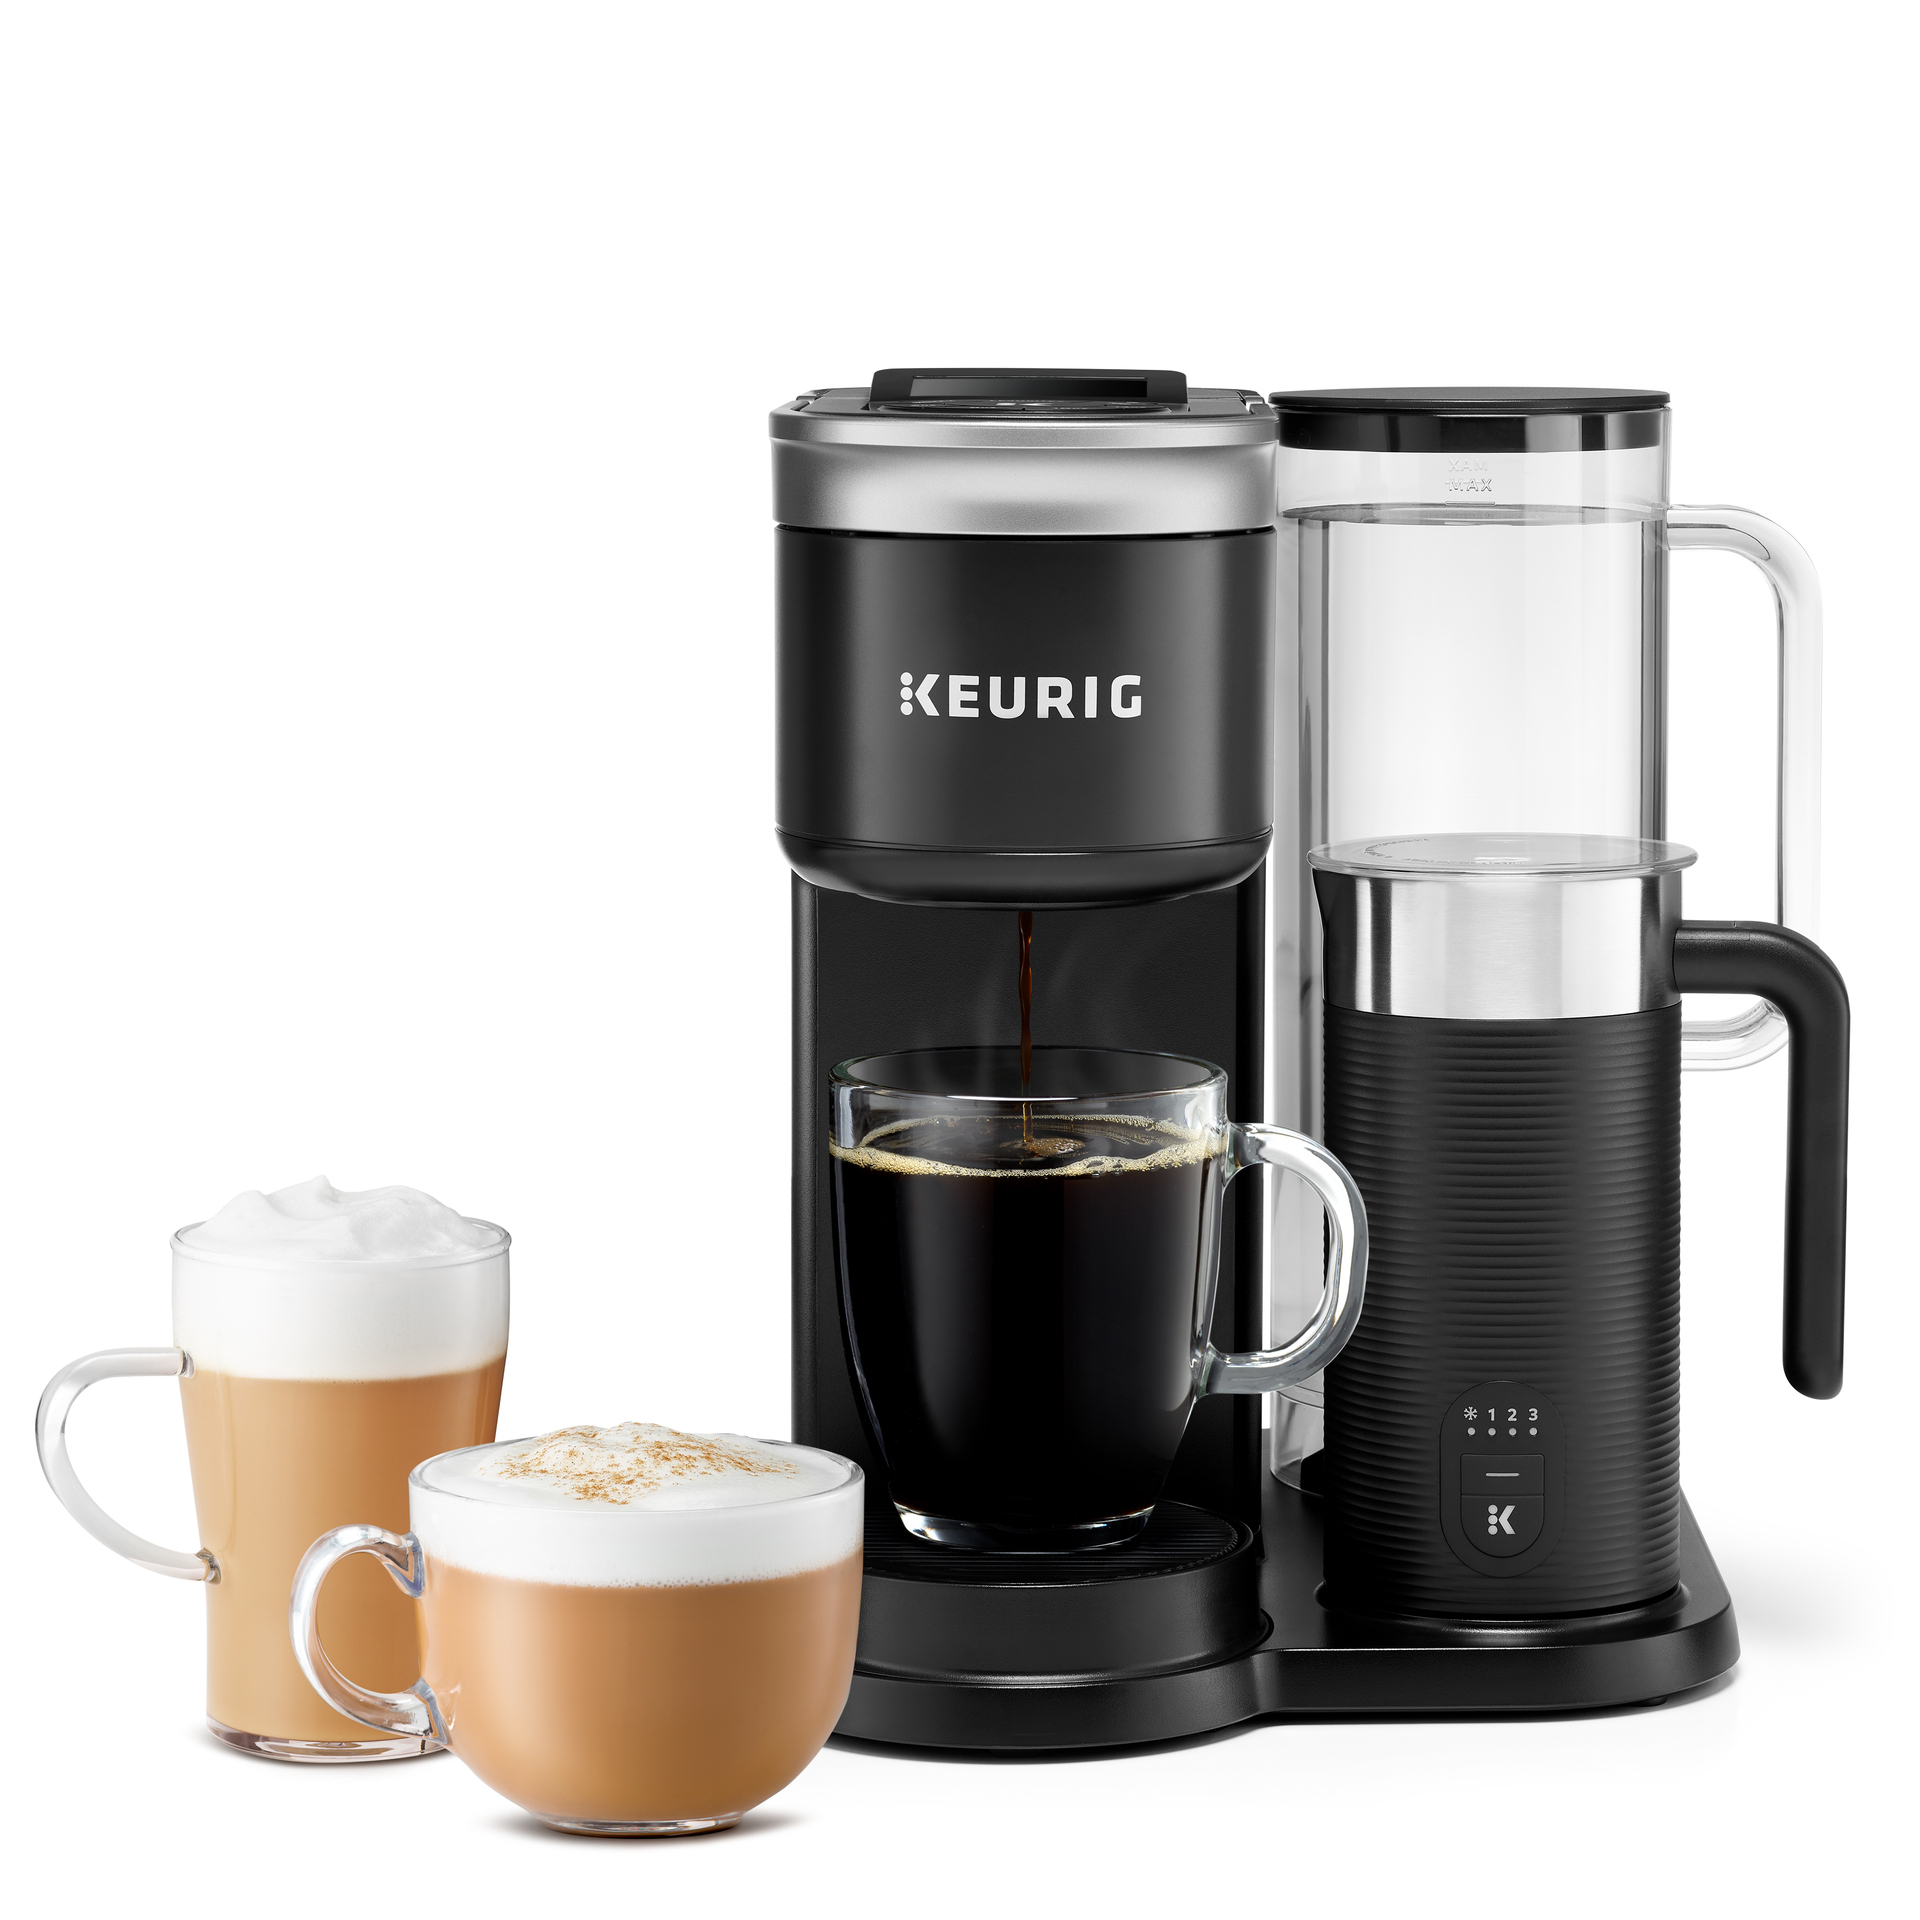 Compact Single Serve Coffee Maker for RV and Home Barista - Brews 6 to 12  oz. K-Cup Pods with Ease